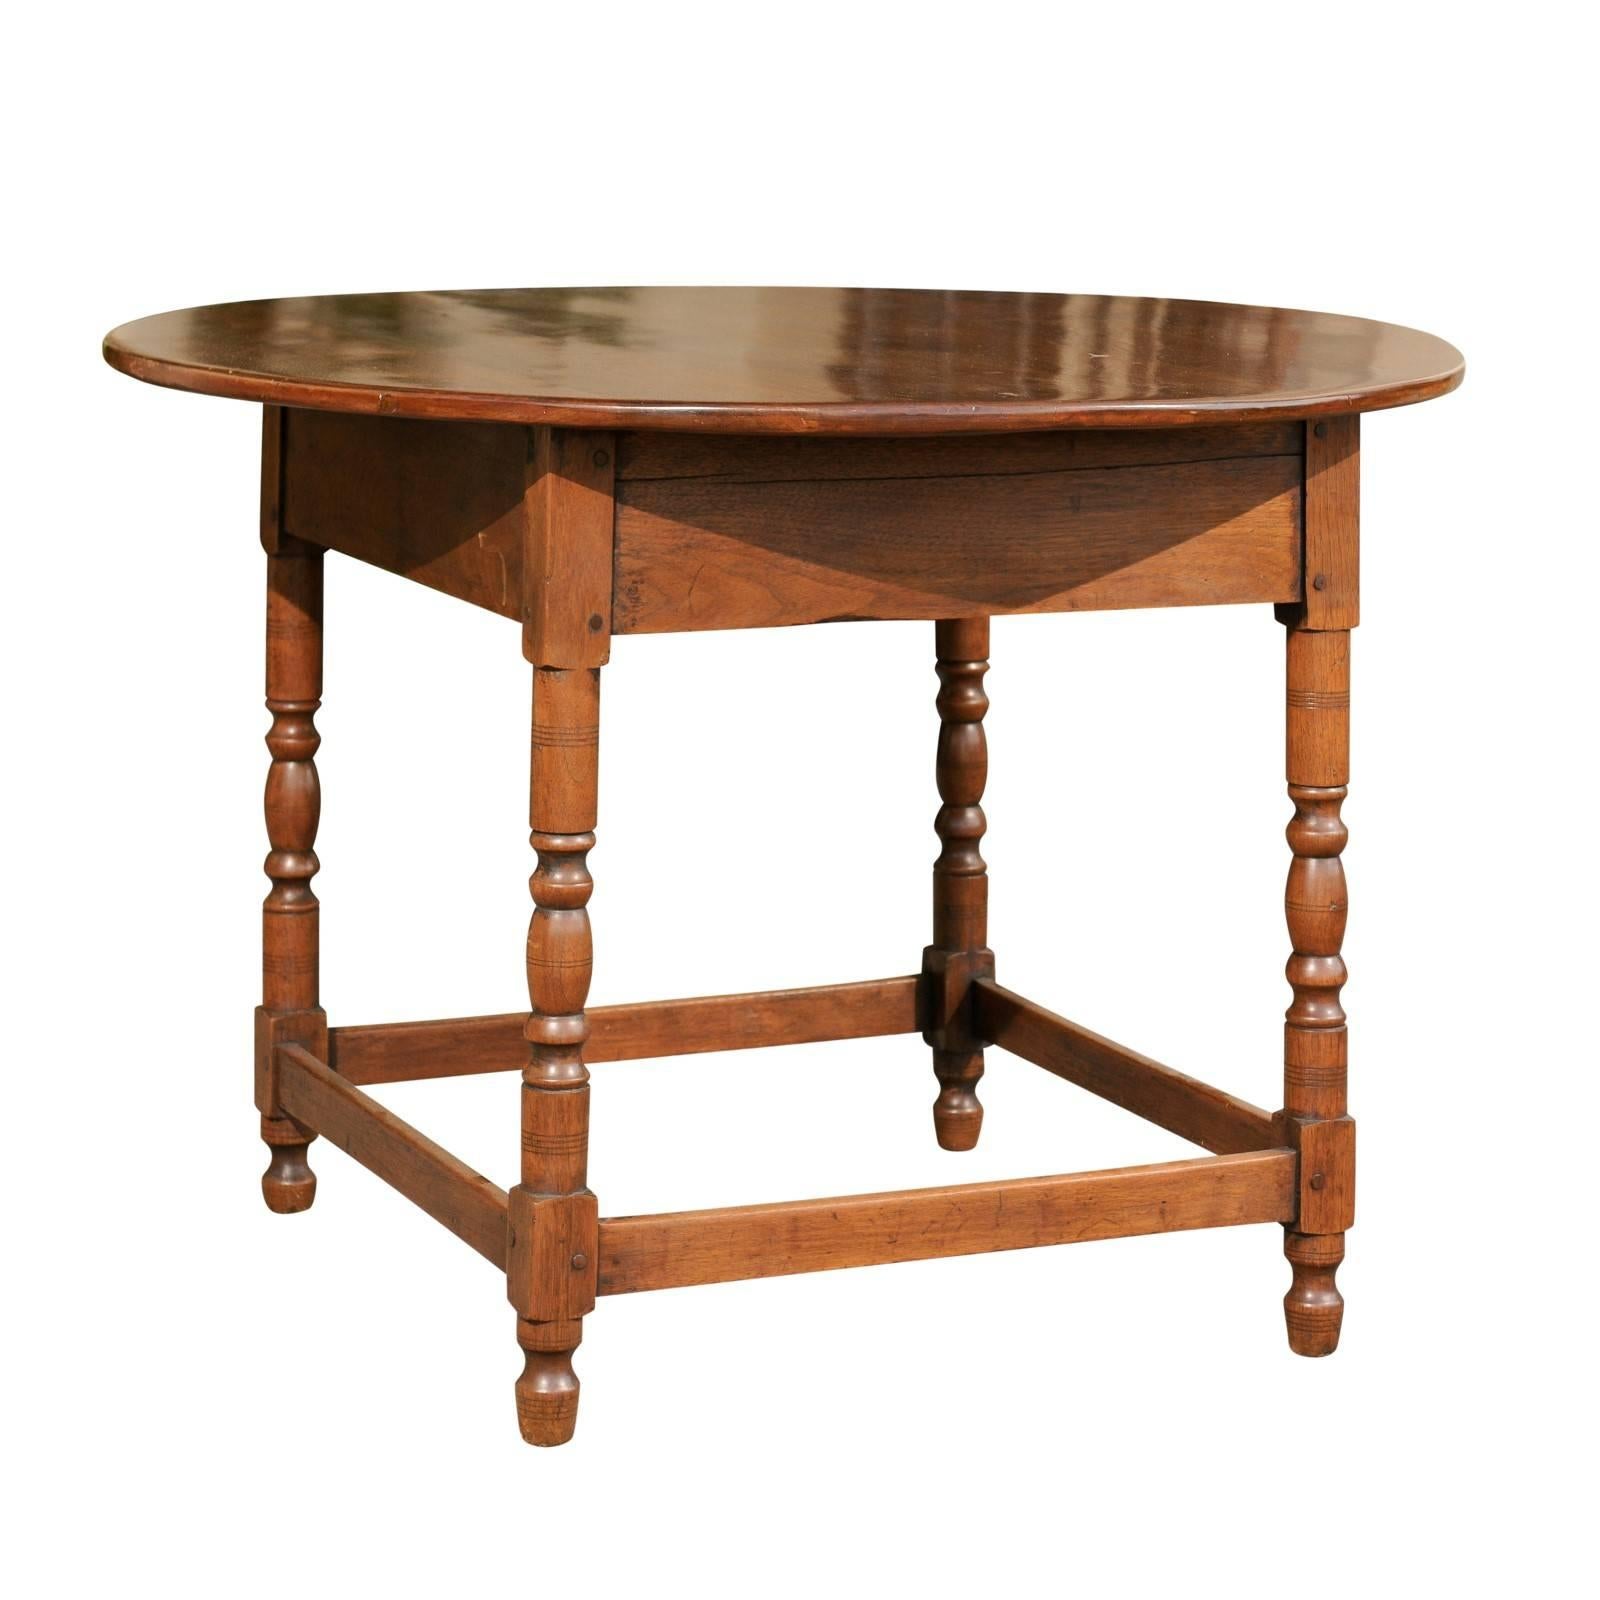 French Walnut Centre Table with Round Top and Turned Legs from the 1880s